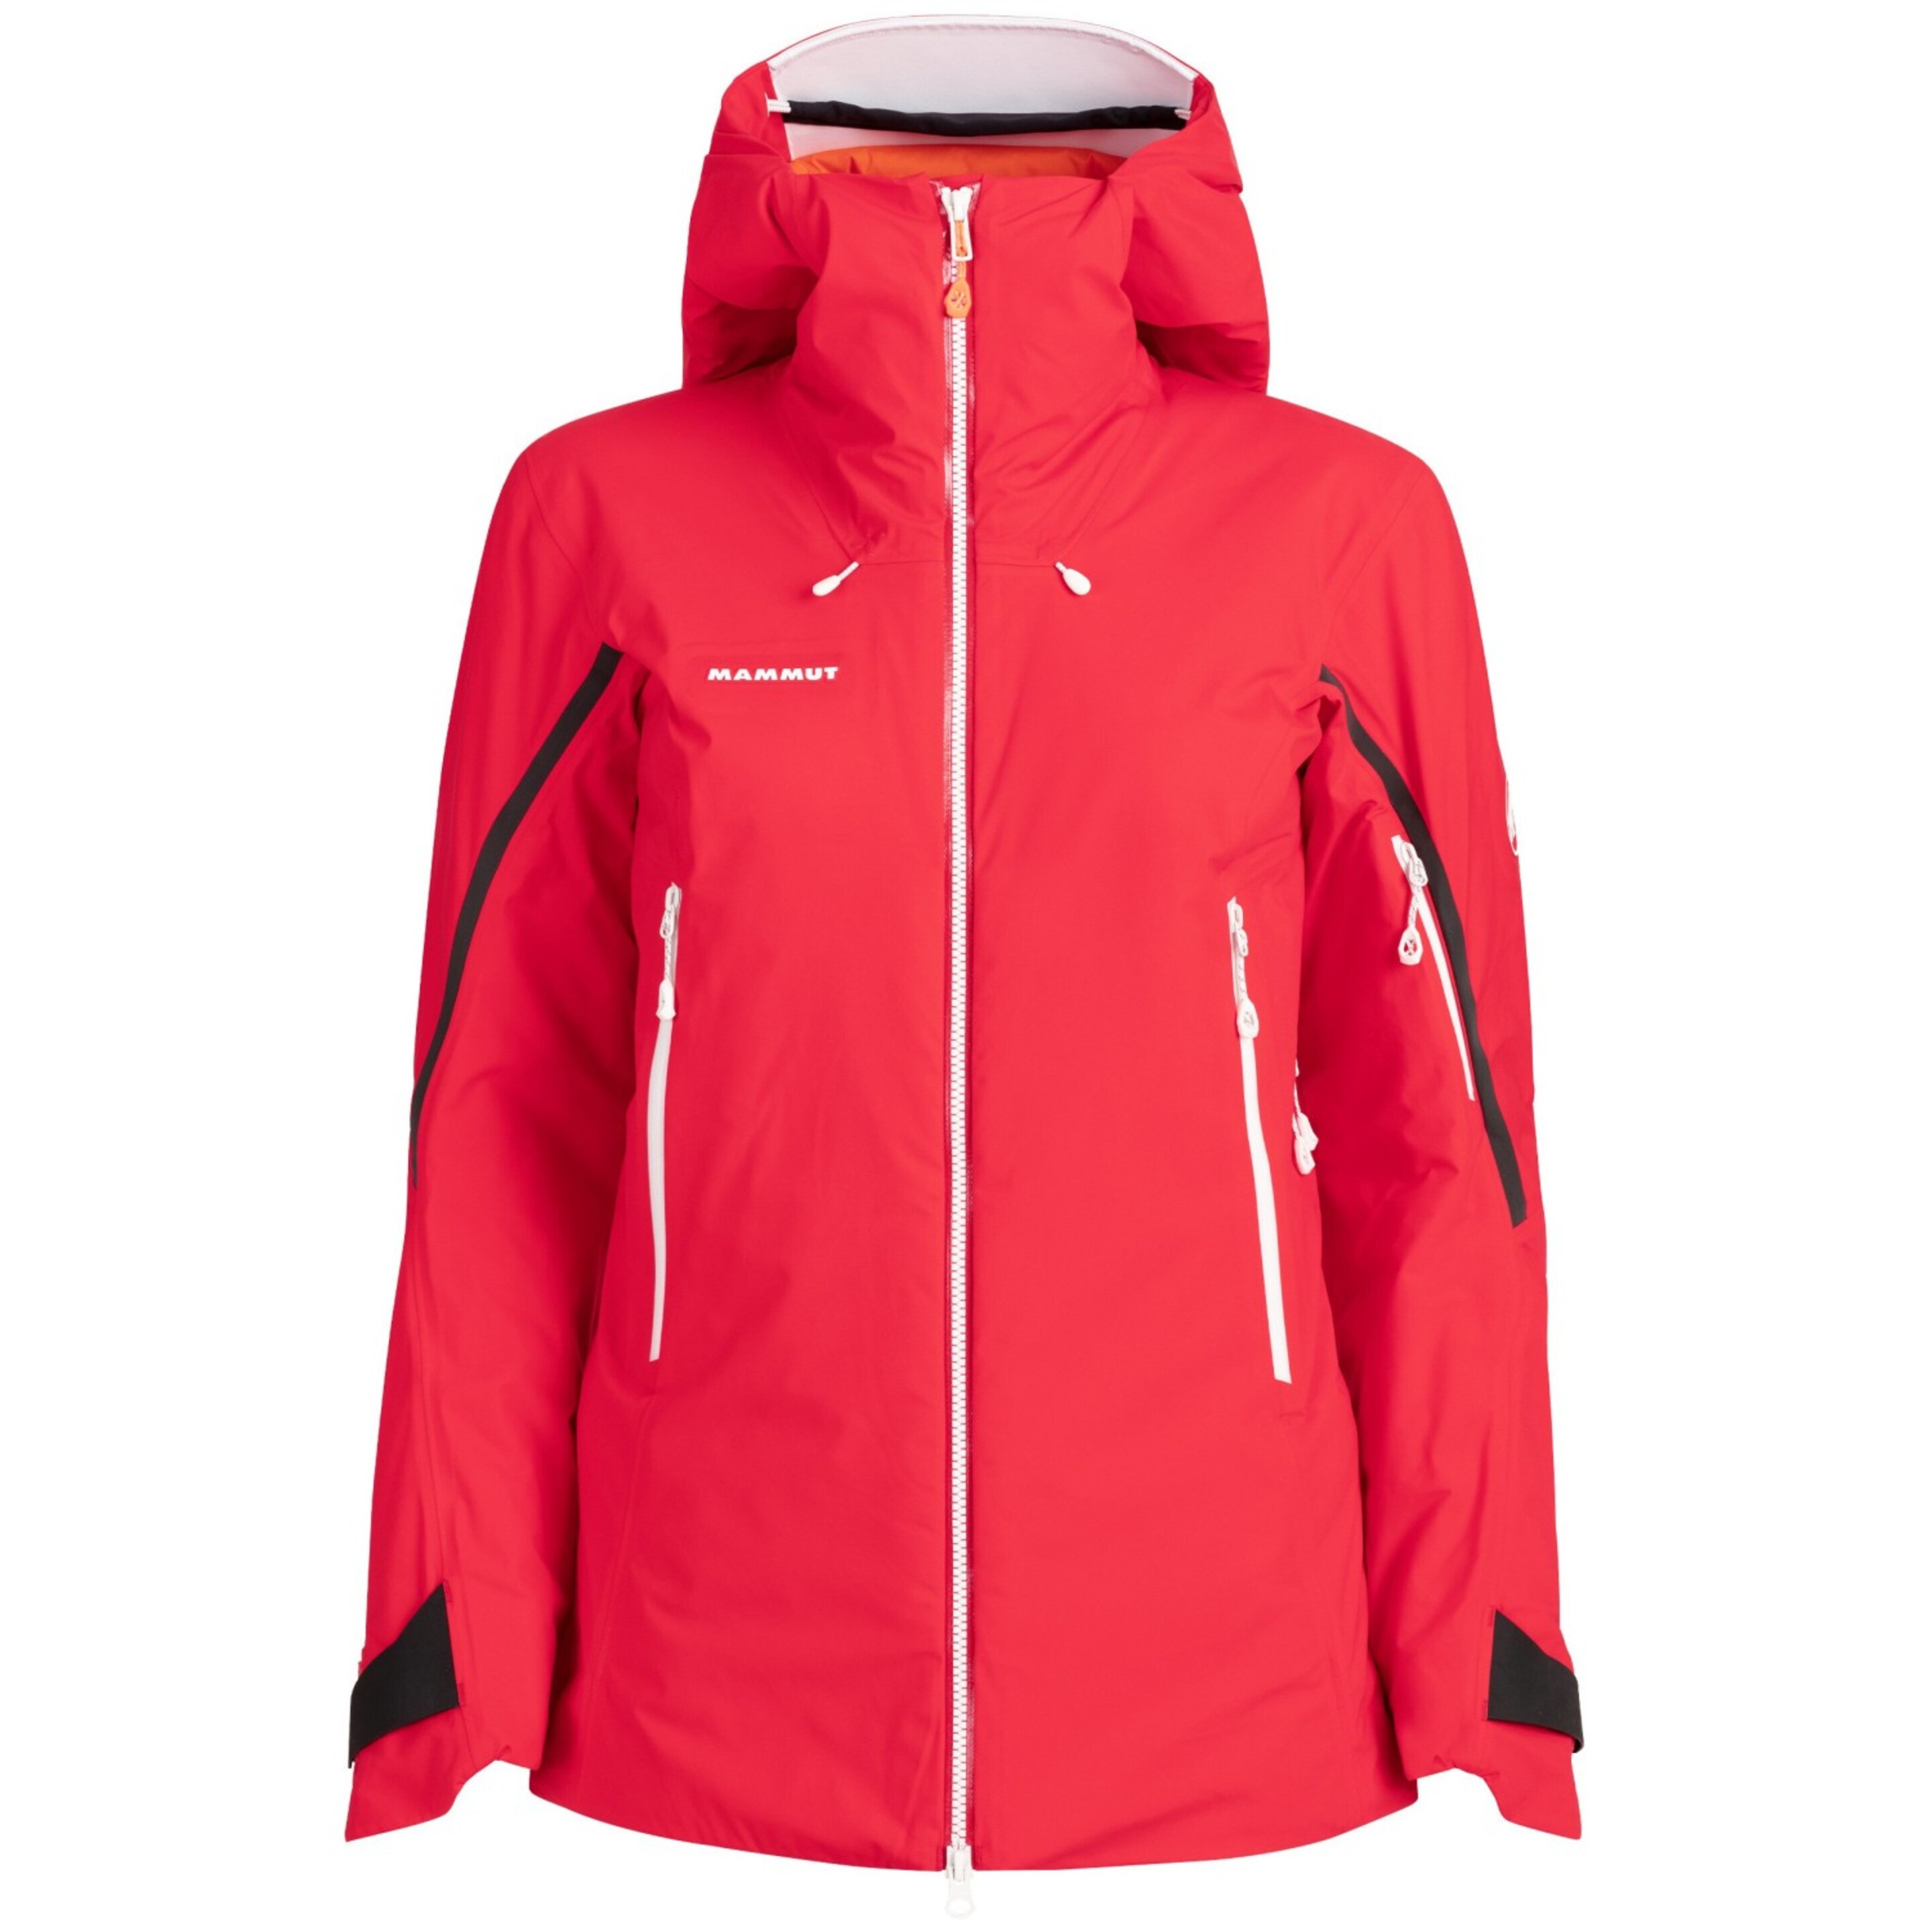 Chaqueta Alpinismo Mujer Nordwand Thermo Hs  Mammut - rojo - 